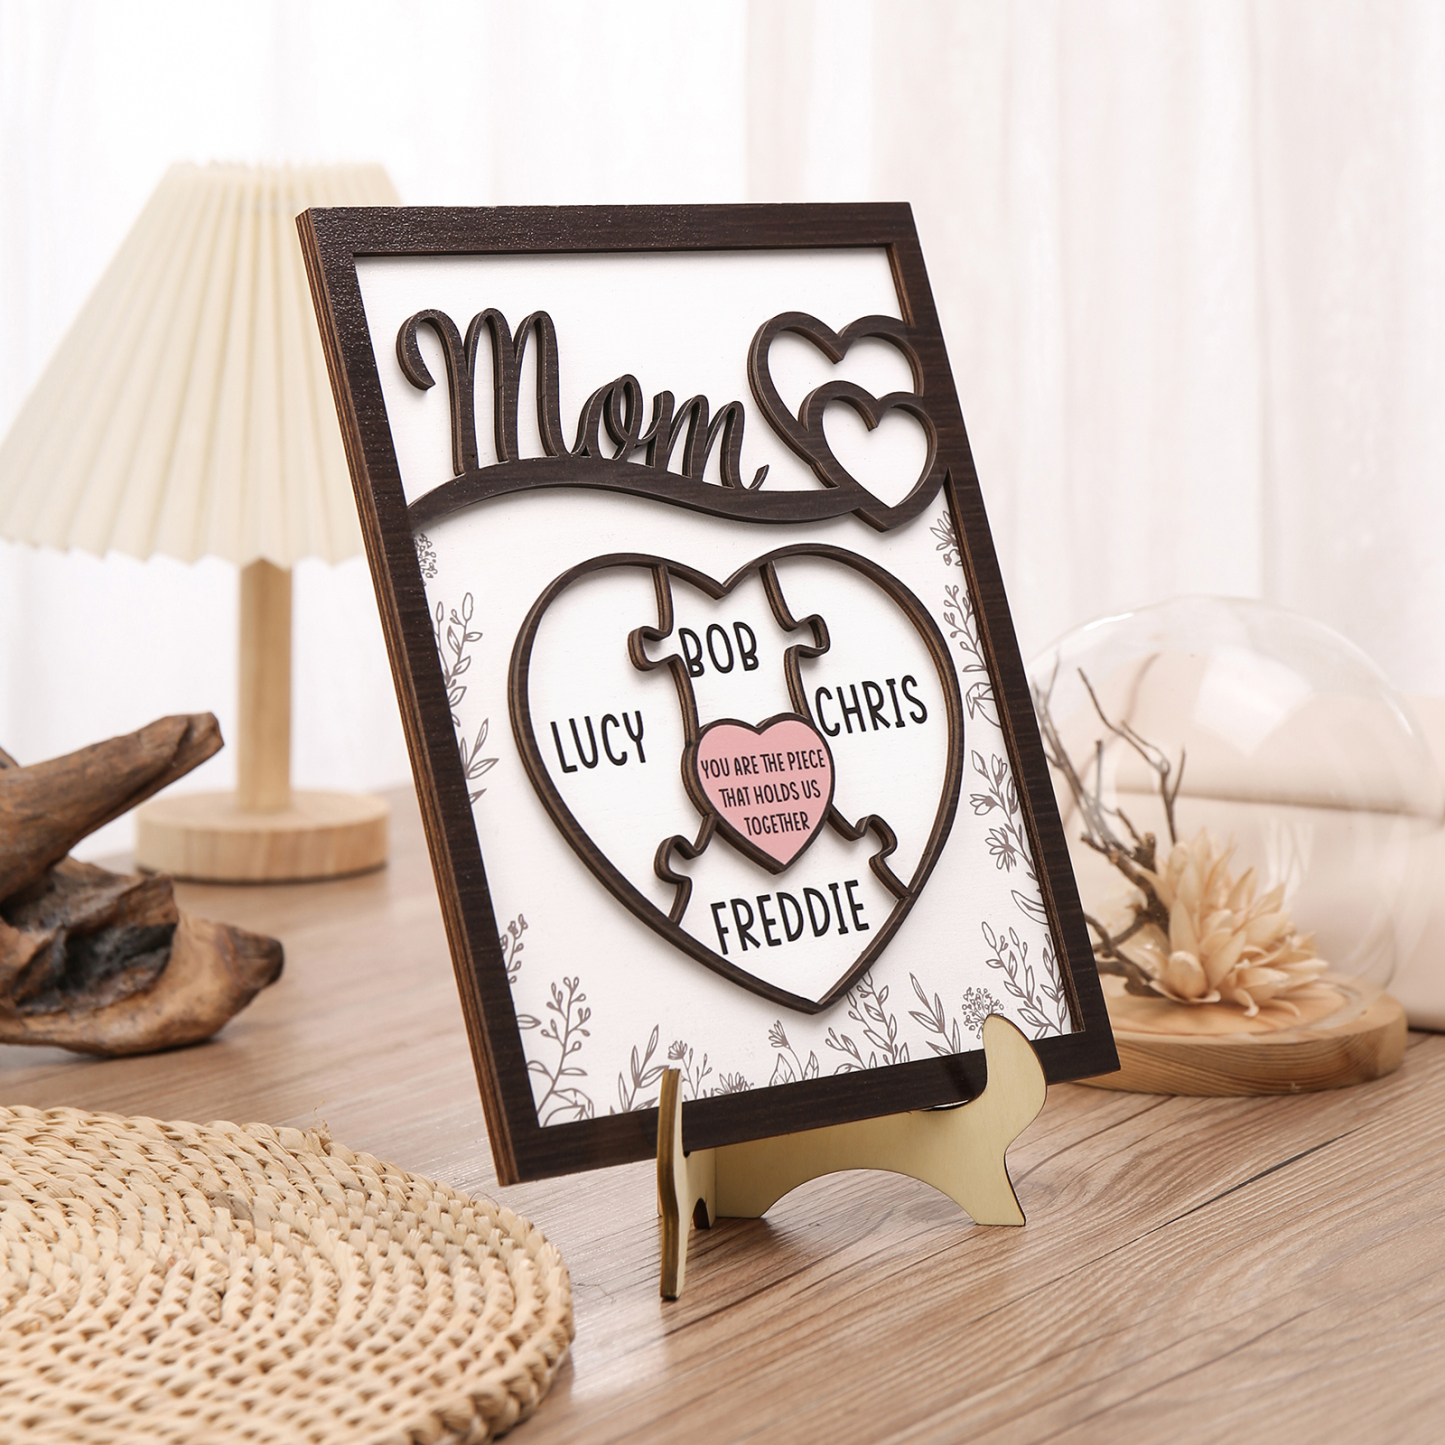 4 Names - Personalized Home Frame Wooden Decoration Customizable with 2 Texts, Love Pieces Wooden Board Painting for Mom